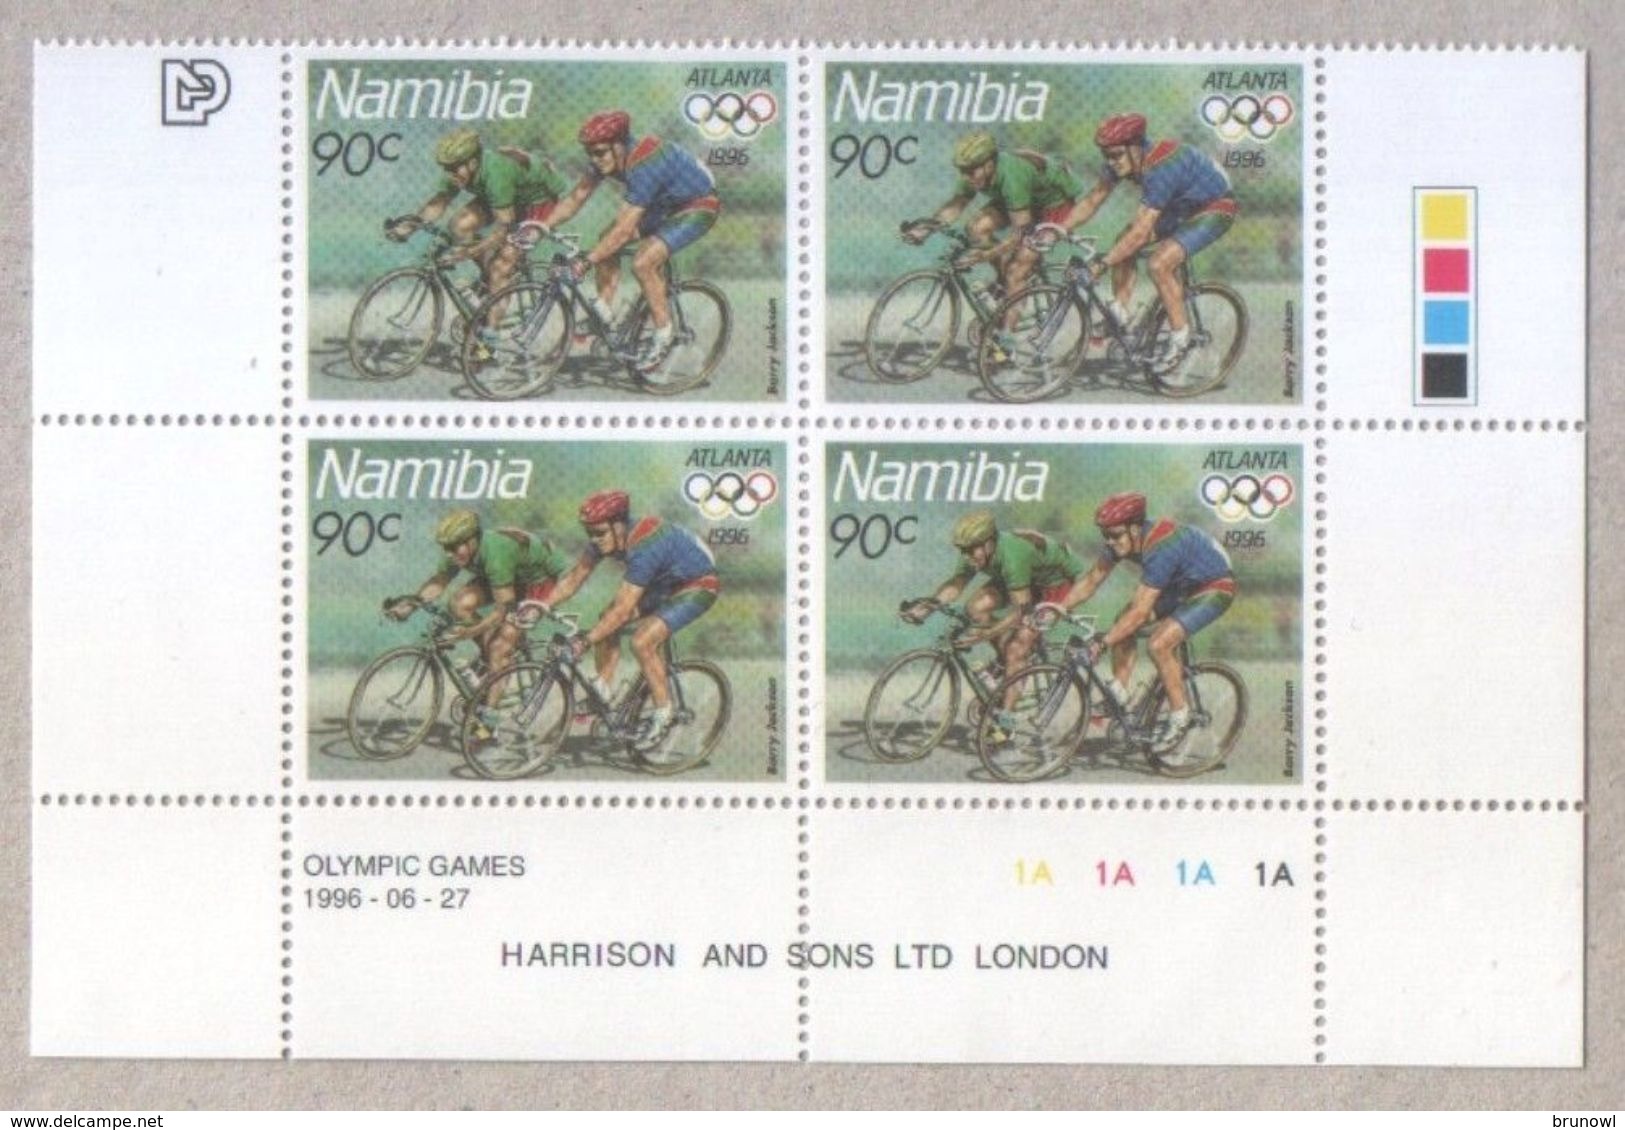 Namibia 1996 Blocks Of Olympic Games Stamps MNH - Namibia (1990- ...)